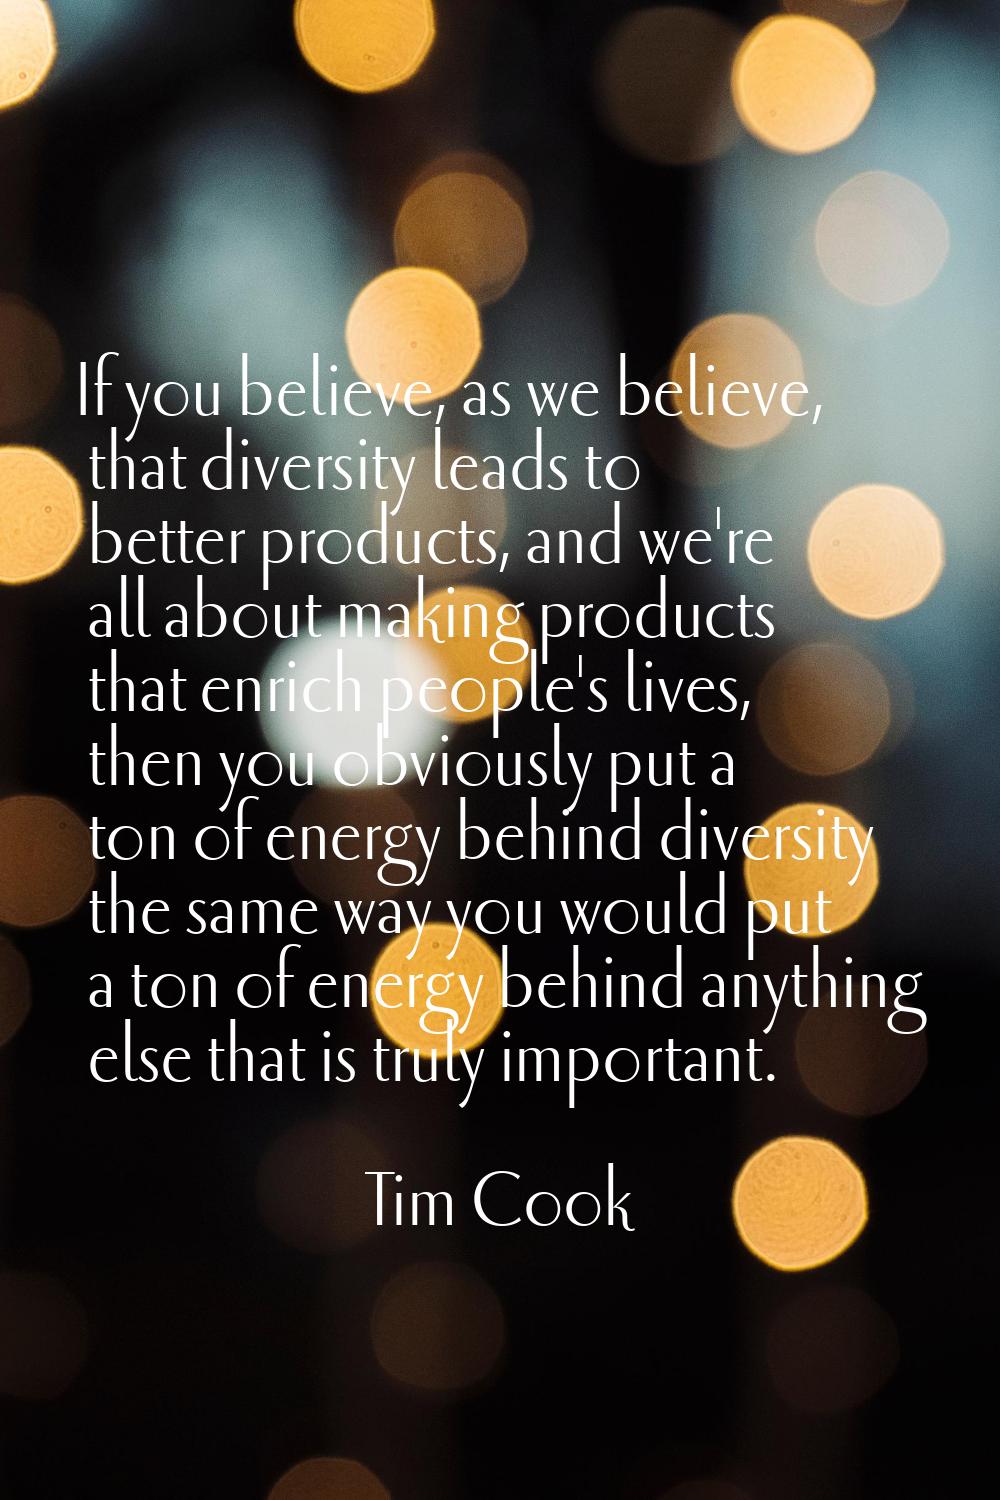 If you believe, as we believe, that diversity leads to better products, and we're all about making 